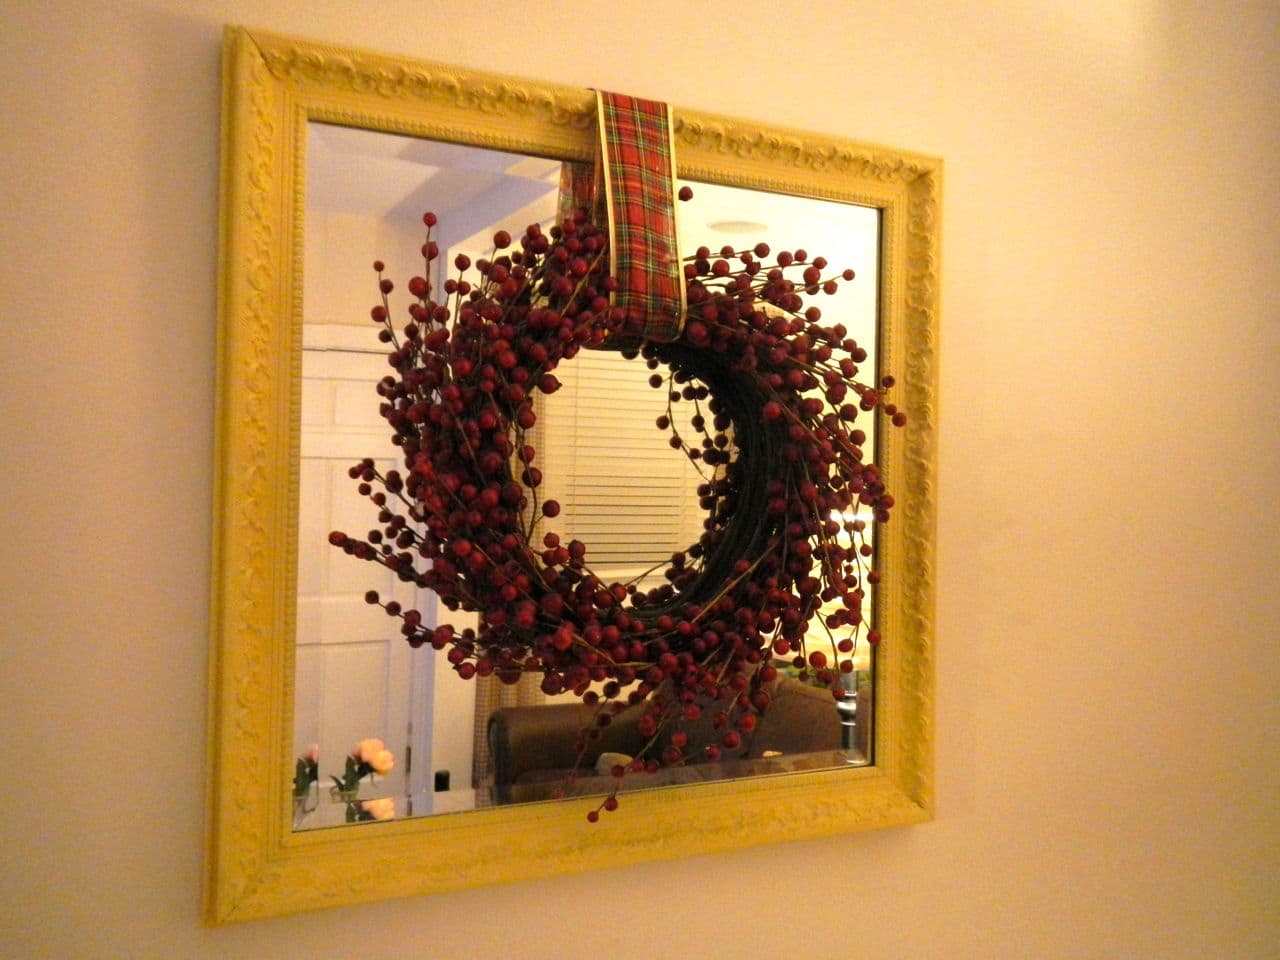 How to Hang a Wreath Over a Mirror